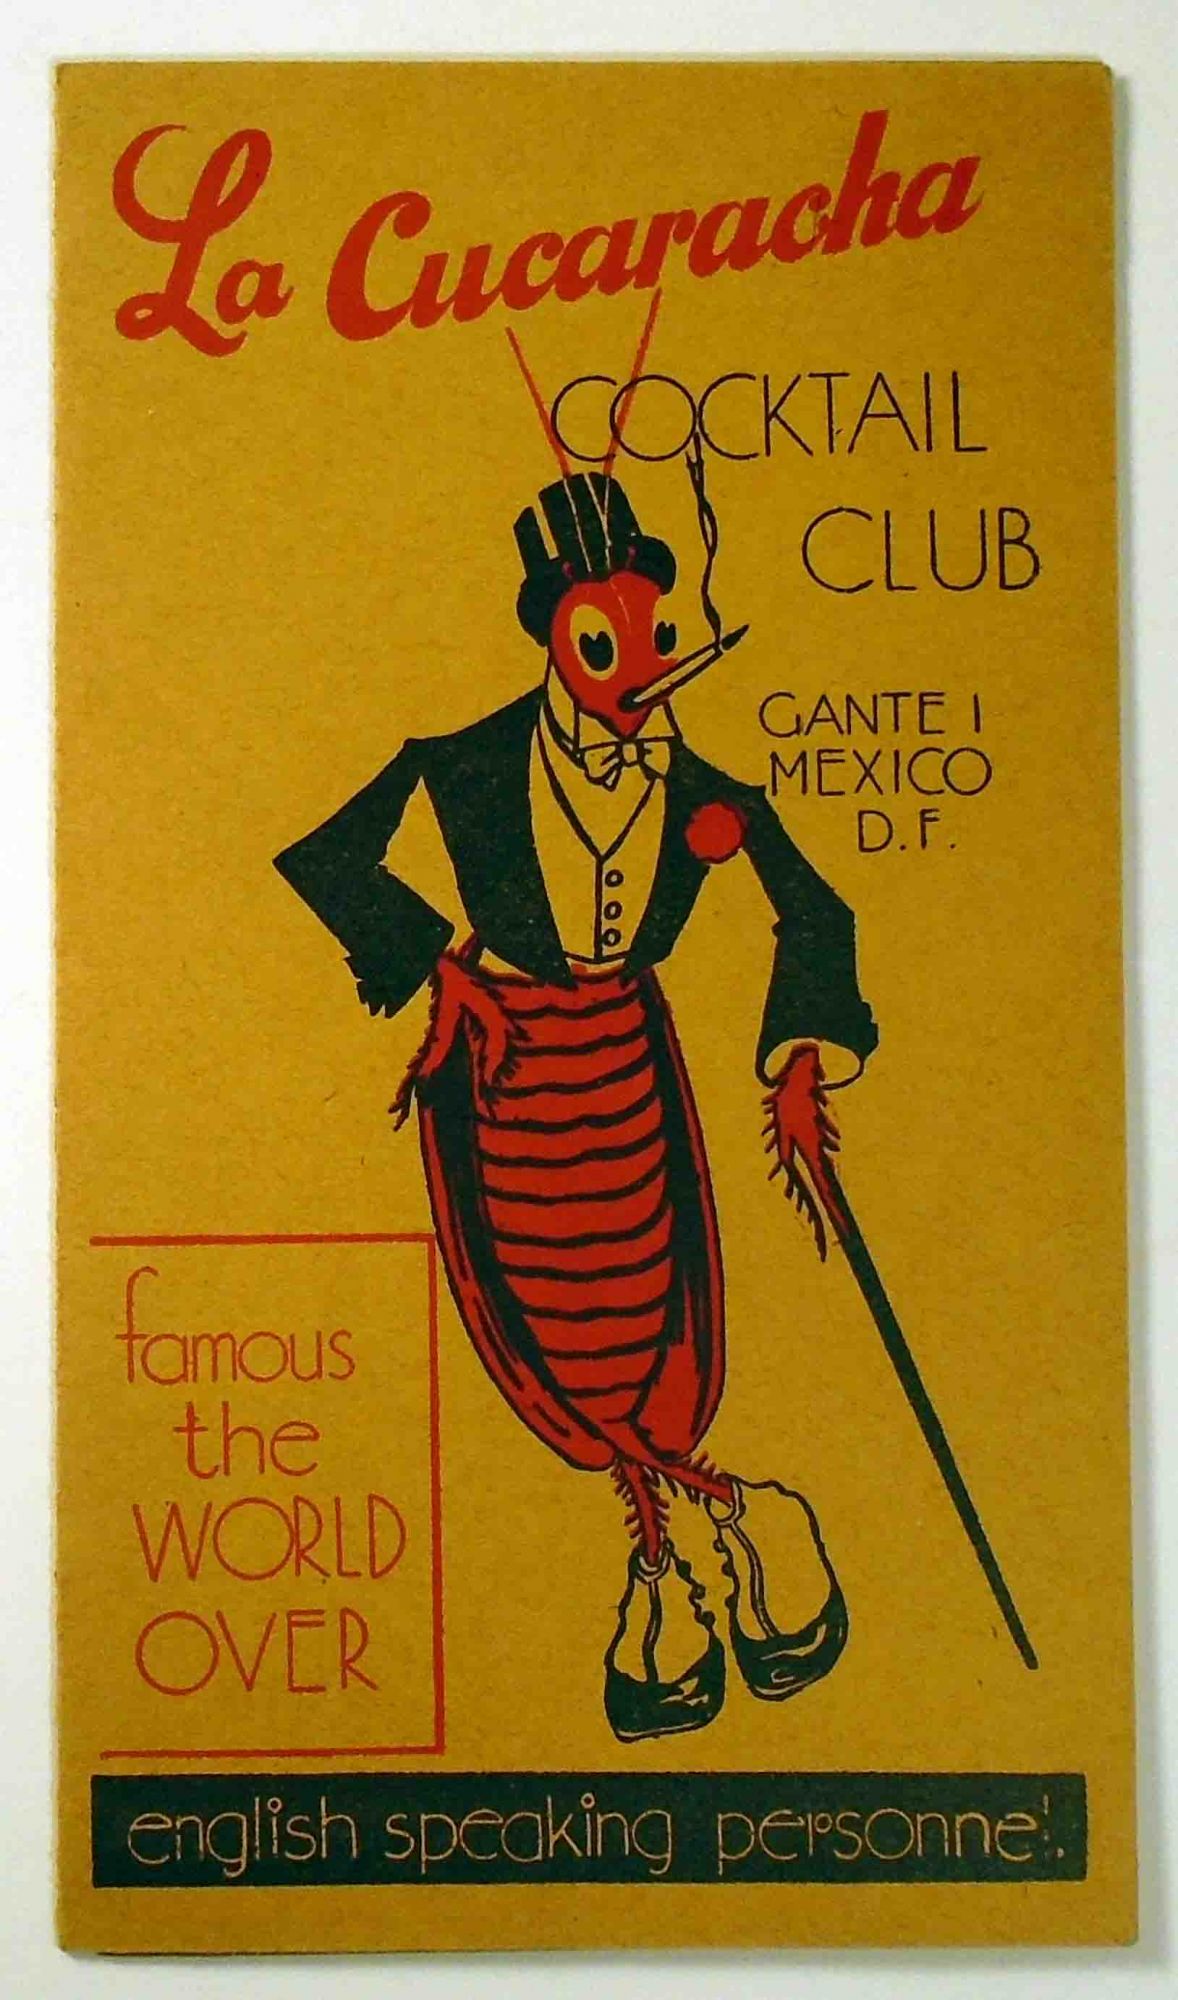 La Cucaracha Cocktail Club. Famous the World Over. English Speaking  Personnel